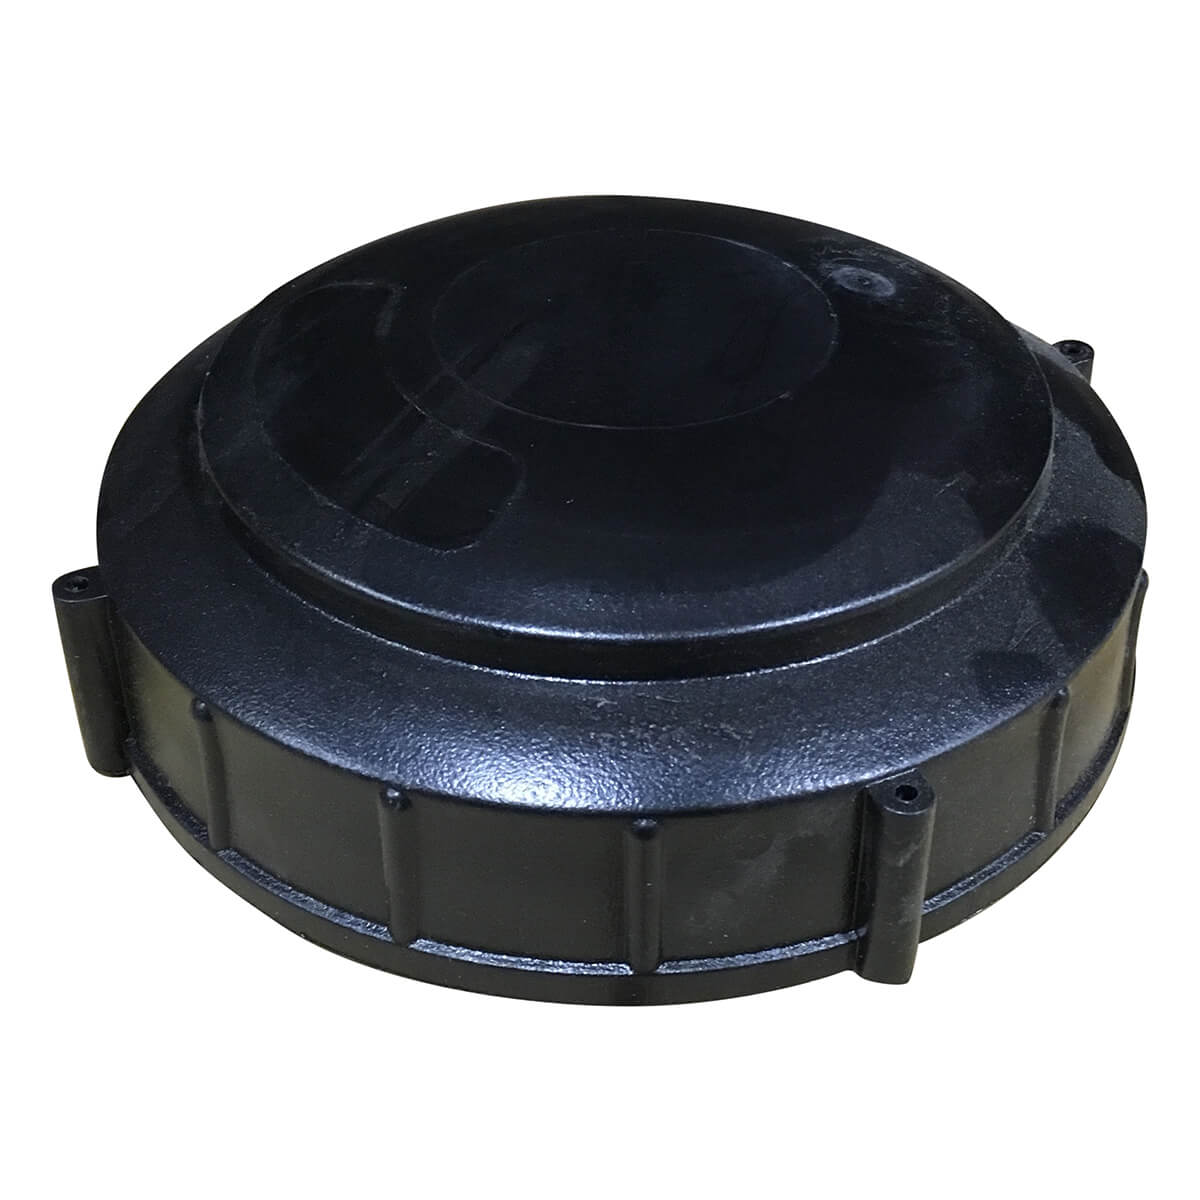 Closed Norwesco Tank Lid - 5-in